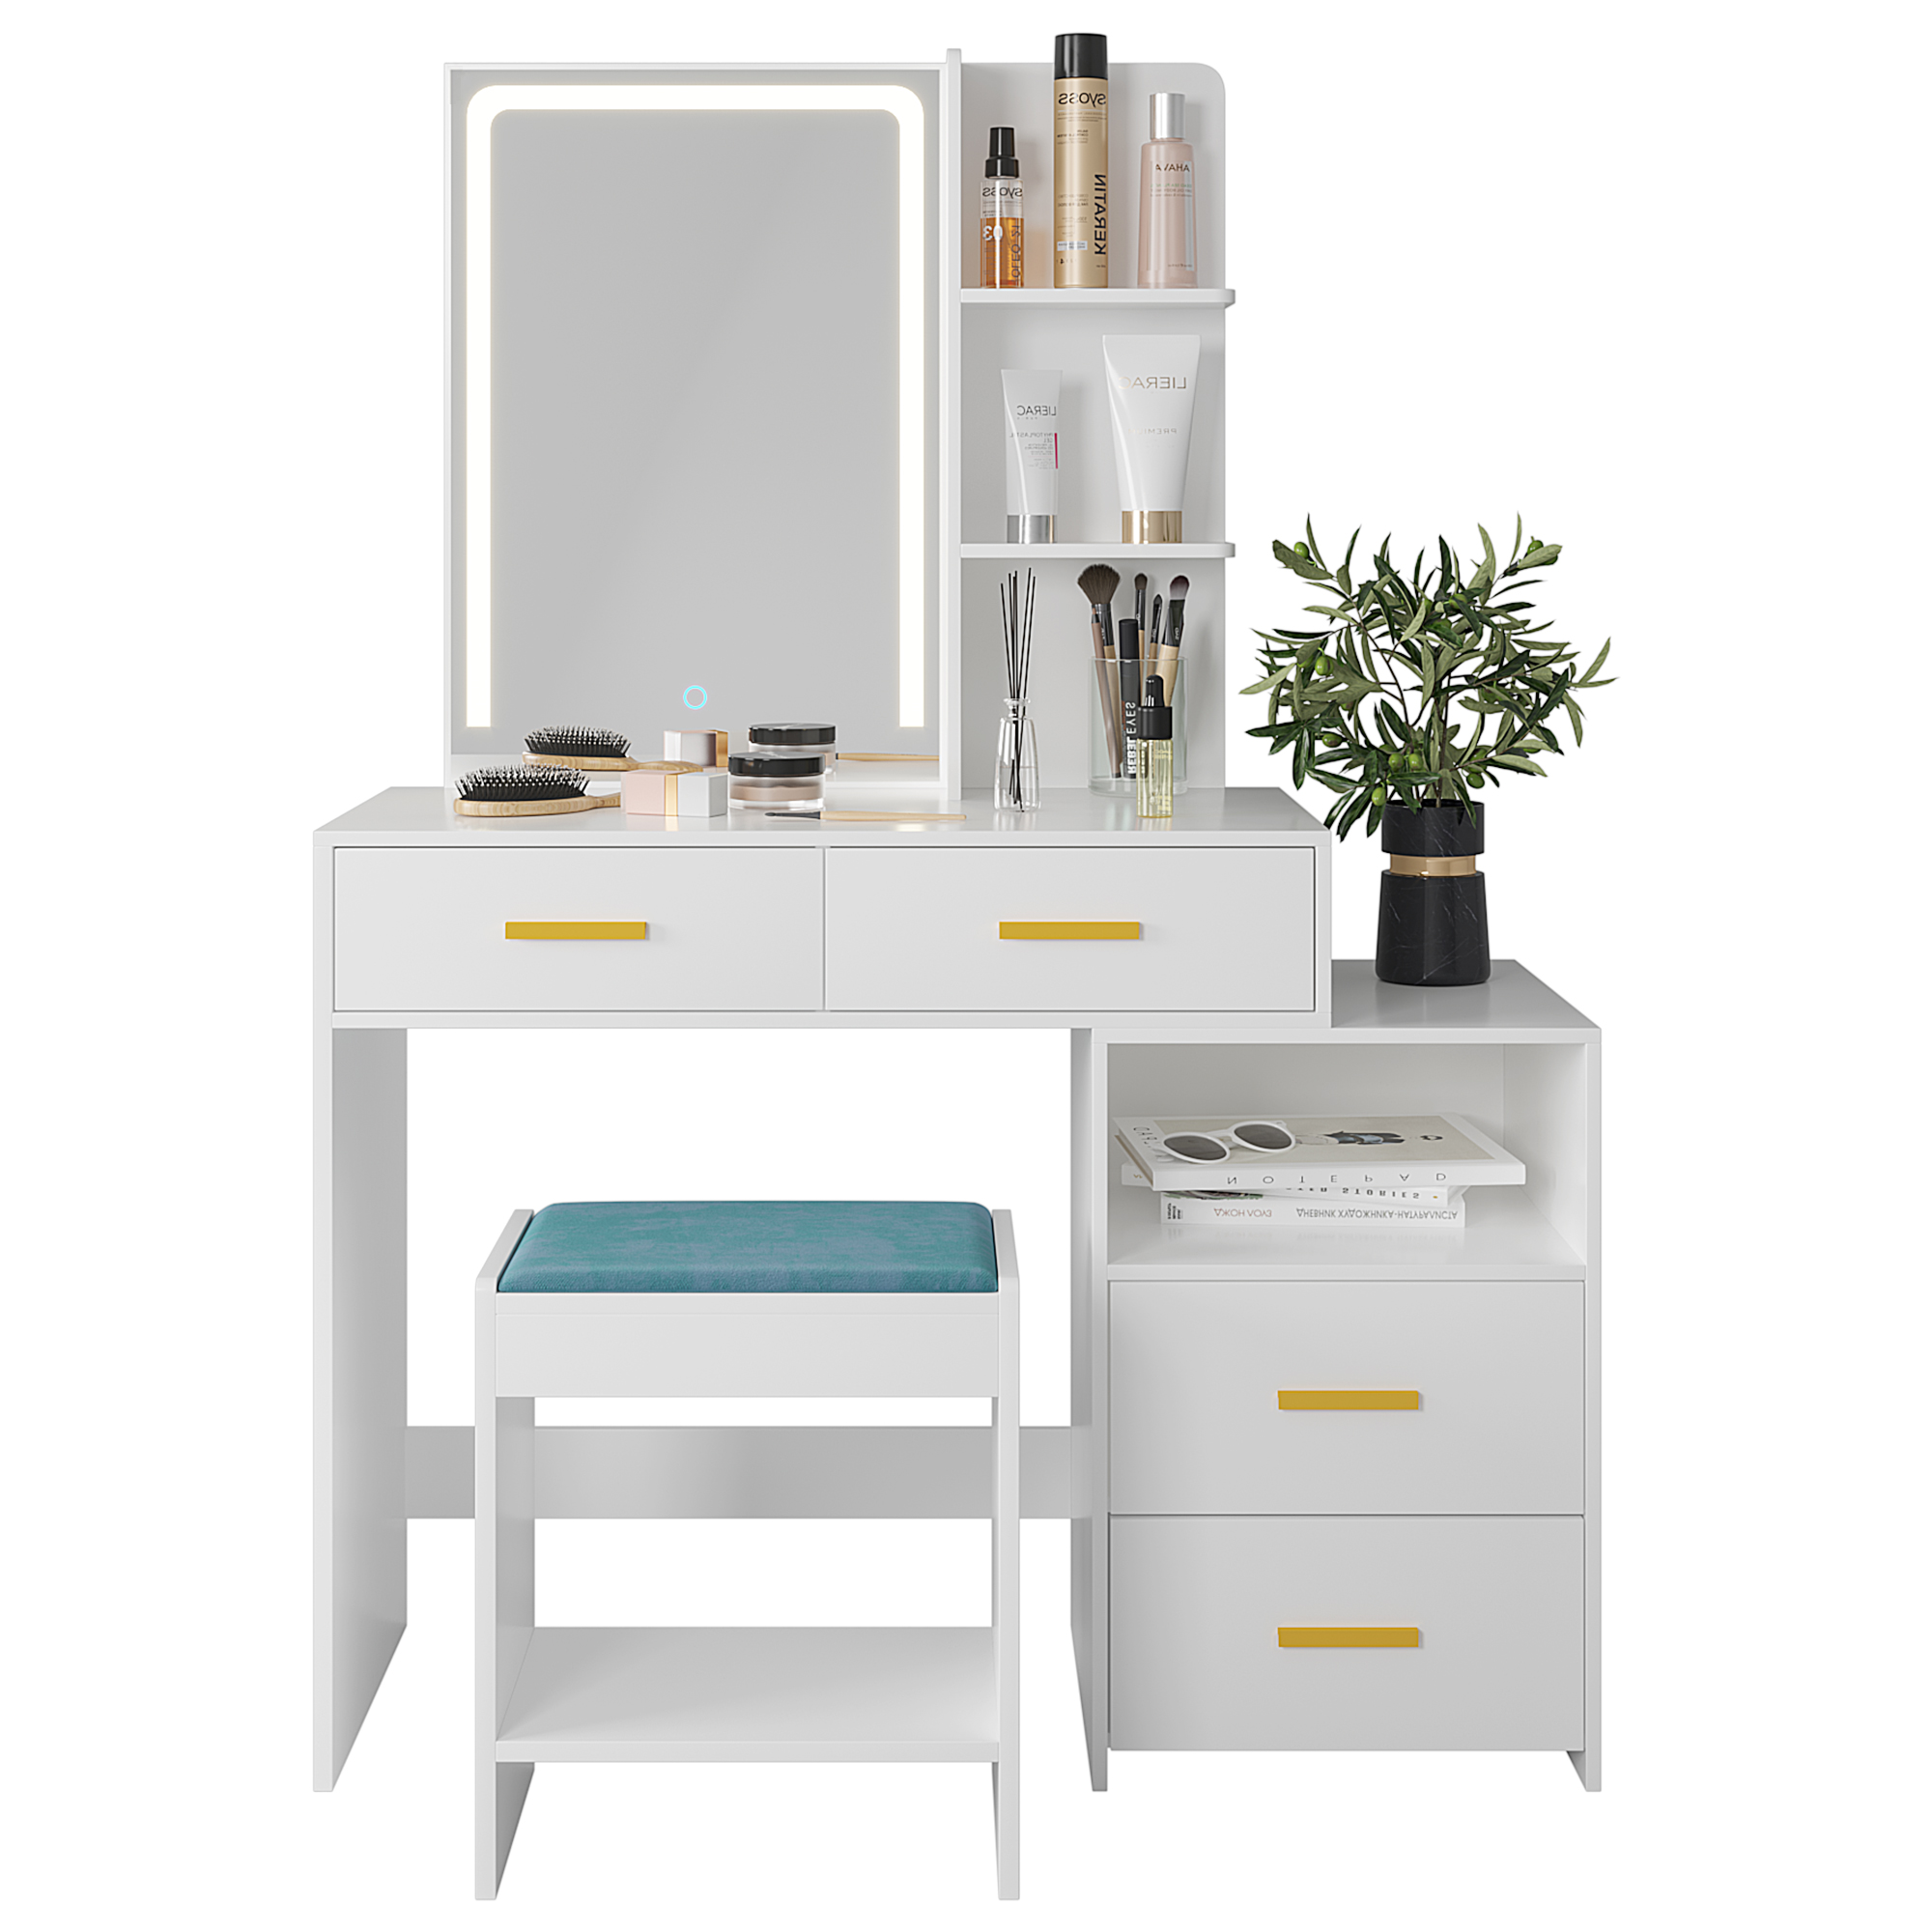 LVSOMT Makeup Vanity Set with Stool and Led Mirror, White, 31.5" Wide